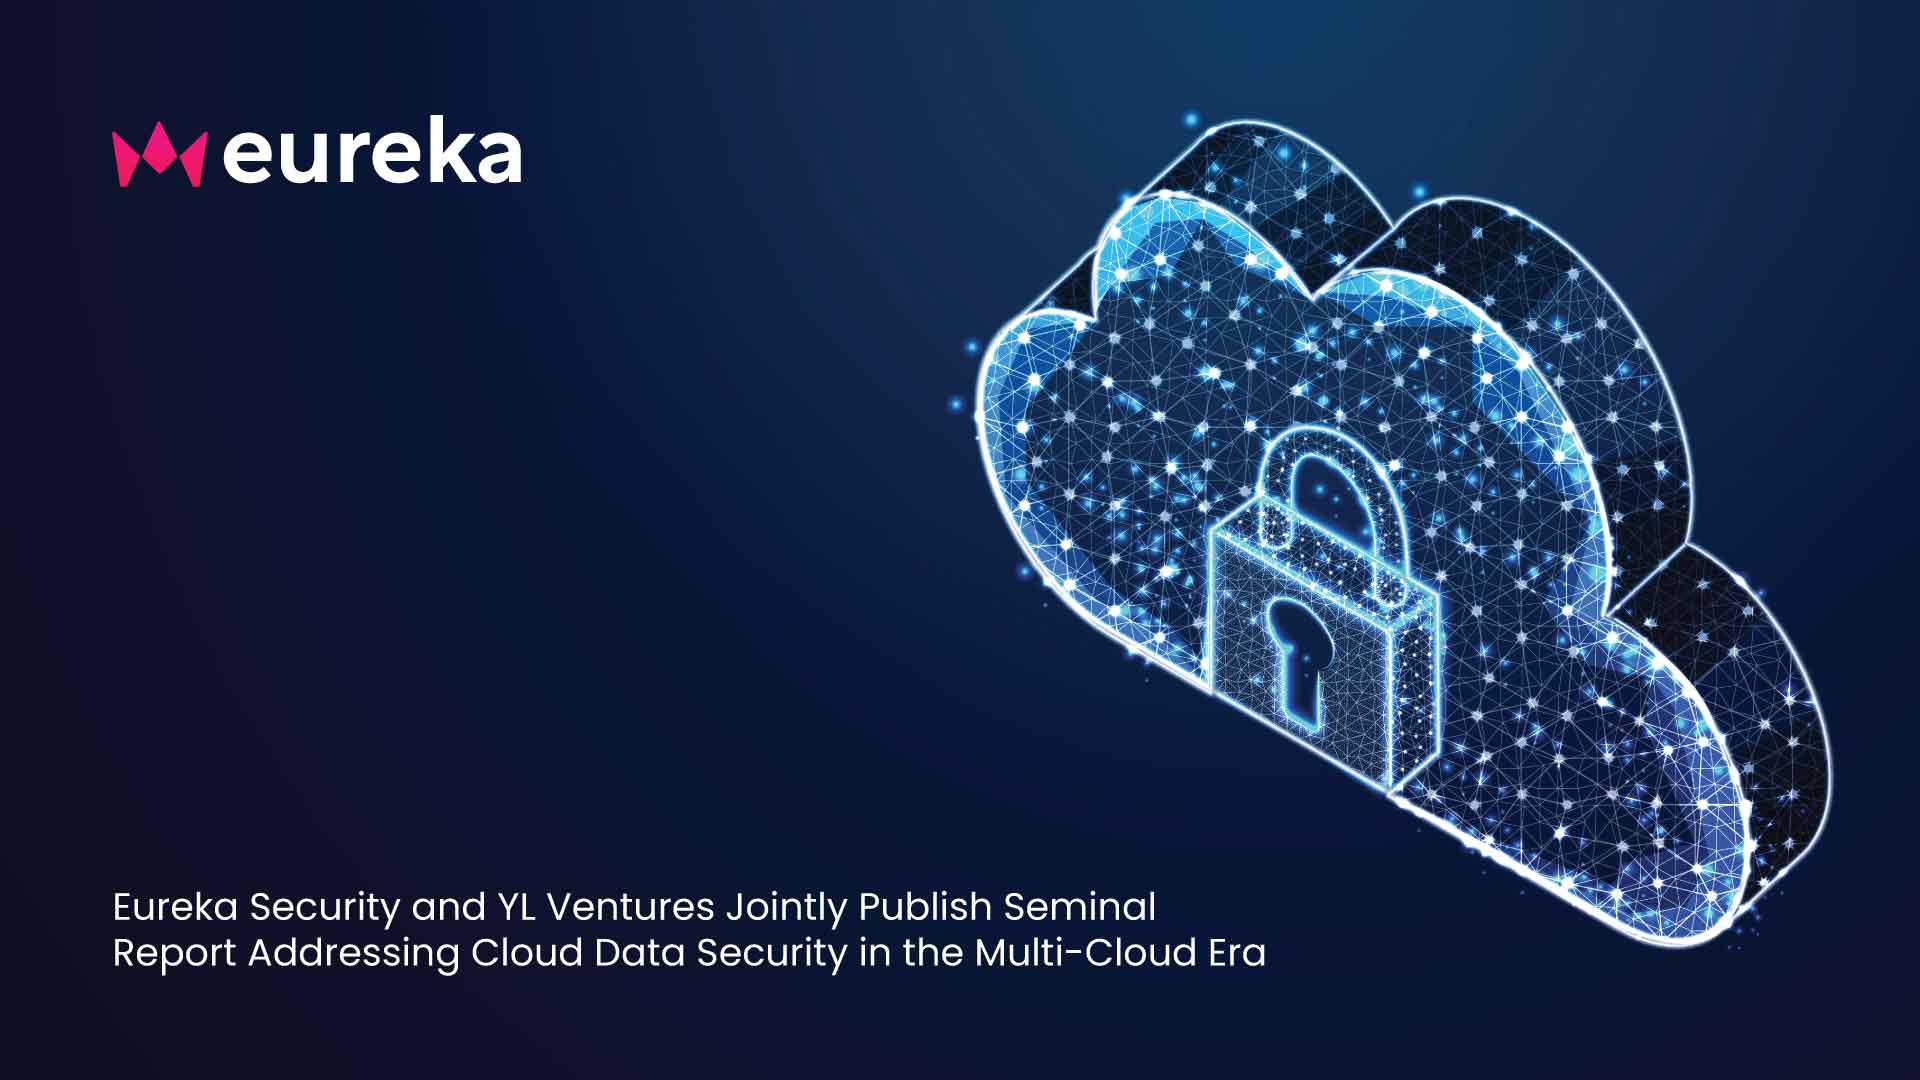 Eureka Security and YL Ventures Jointly Publish Seminal Report Addressing Cloud Data Security in the Multi-Cloud Era